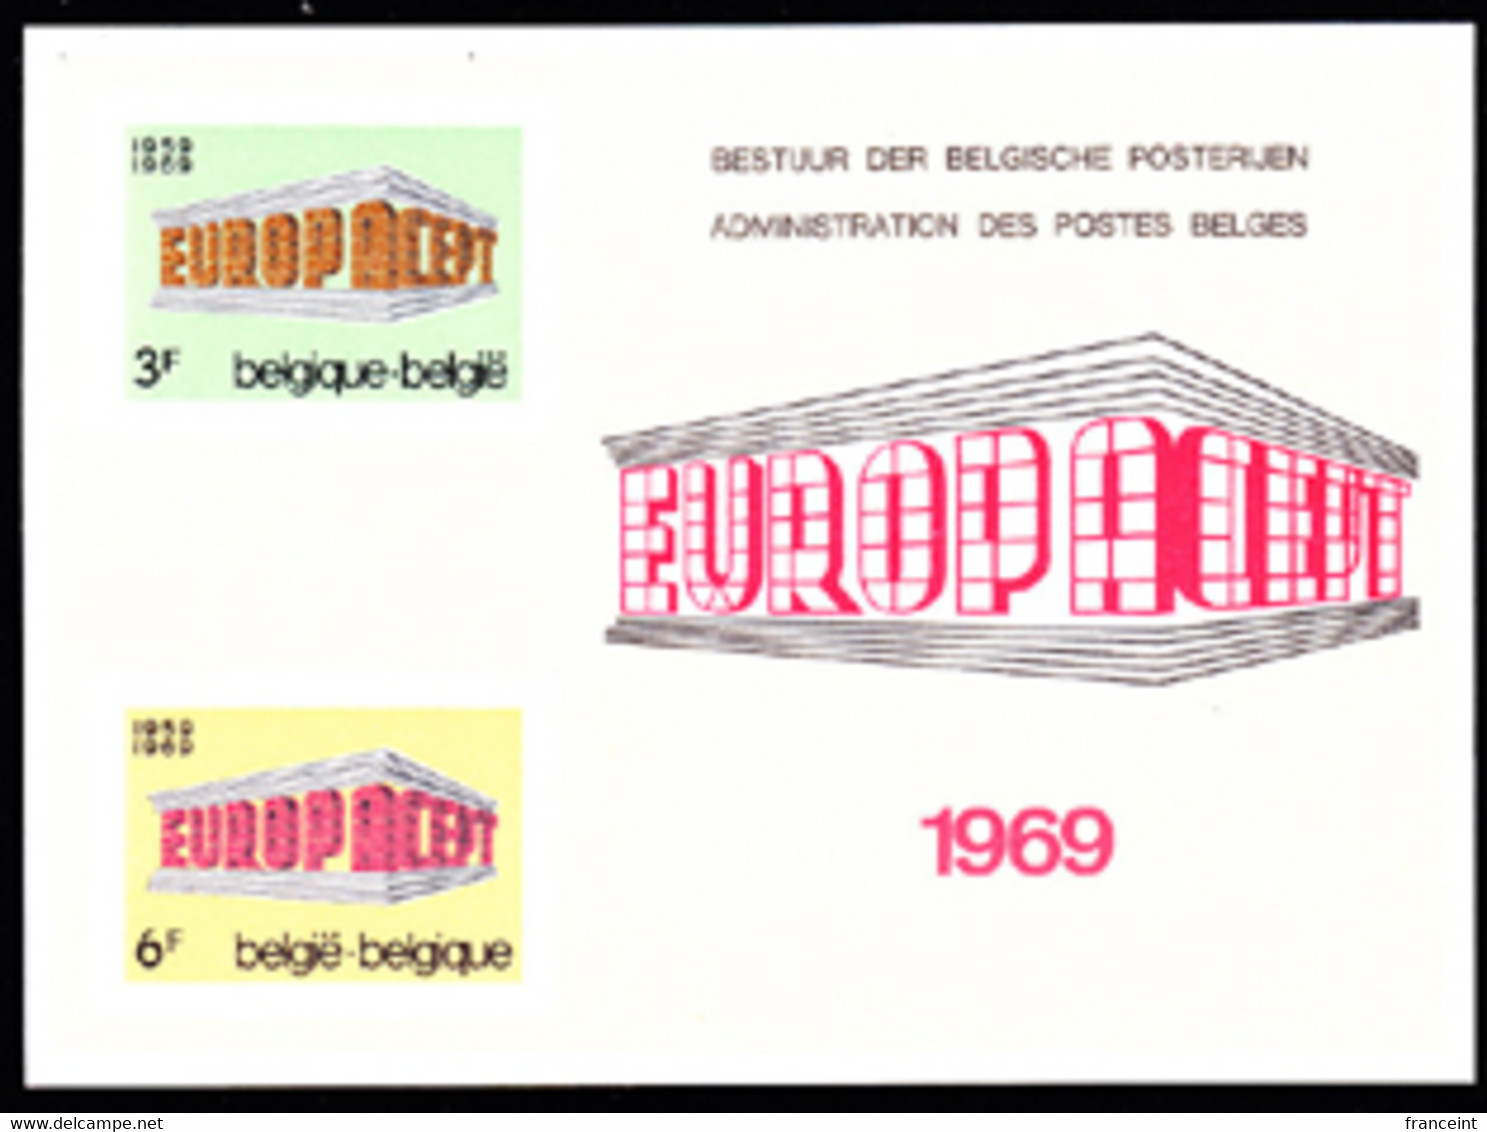 BELGIUM(1969) Stylised Buildings. Scott Nos 718-9. Yvert Nos 1489-90. Europa Issue. Deluxe Proof (LX54). - Deluxe Sheetlets [LX]